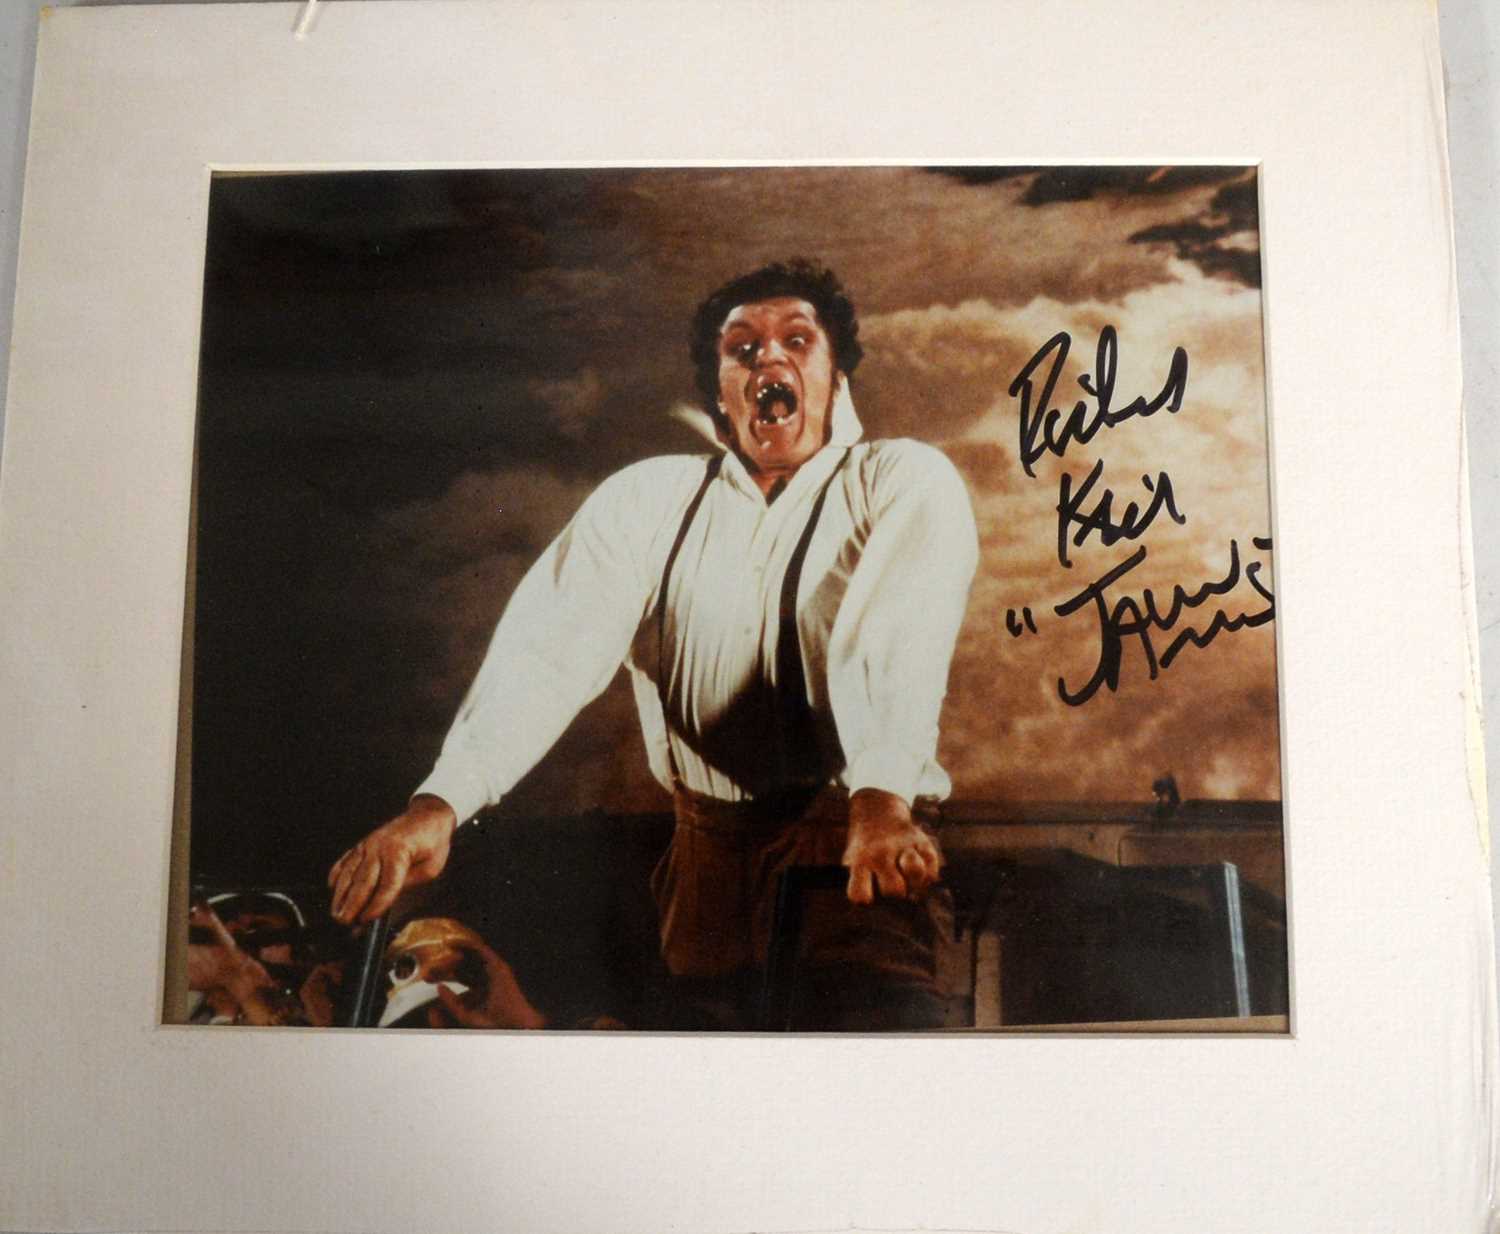 A collection of James Bond interest autographed photos. - Image 7 of 7